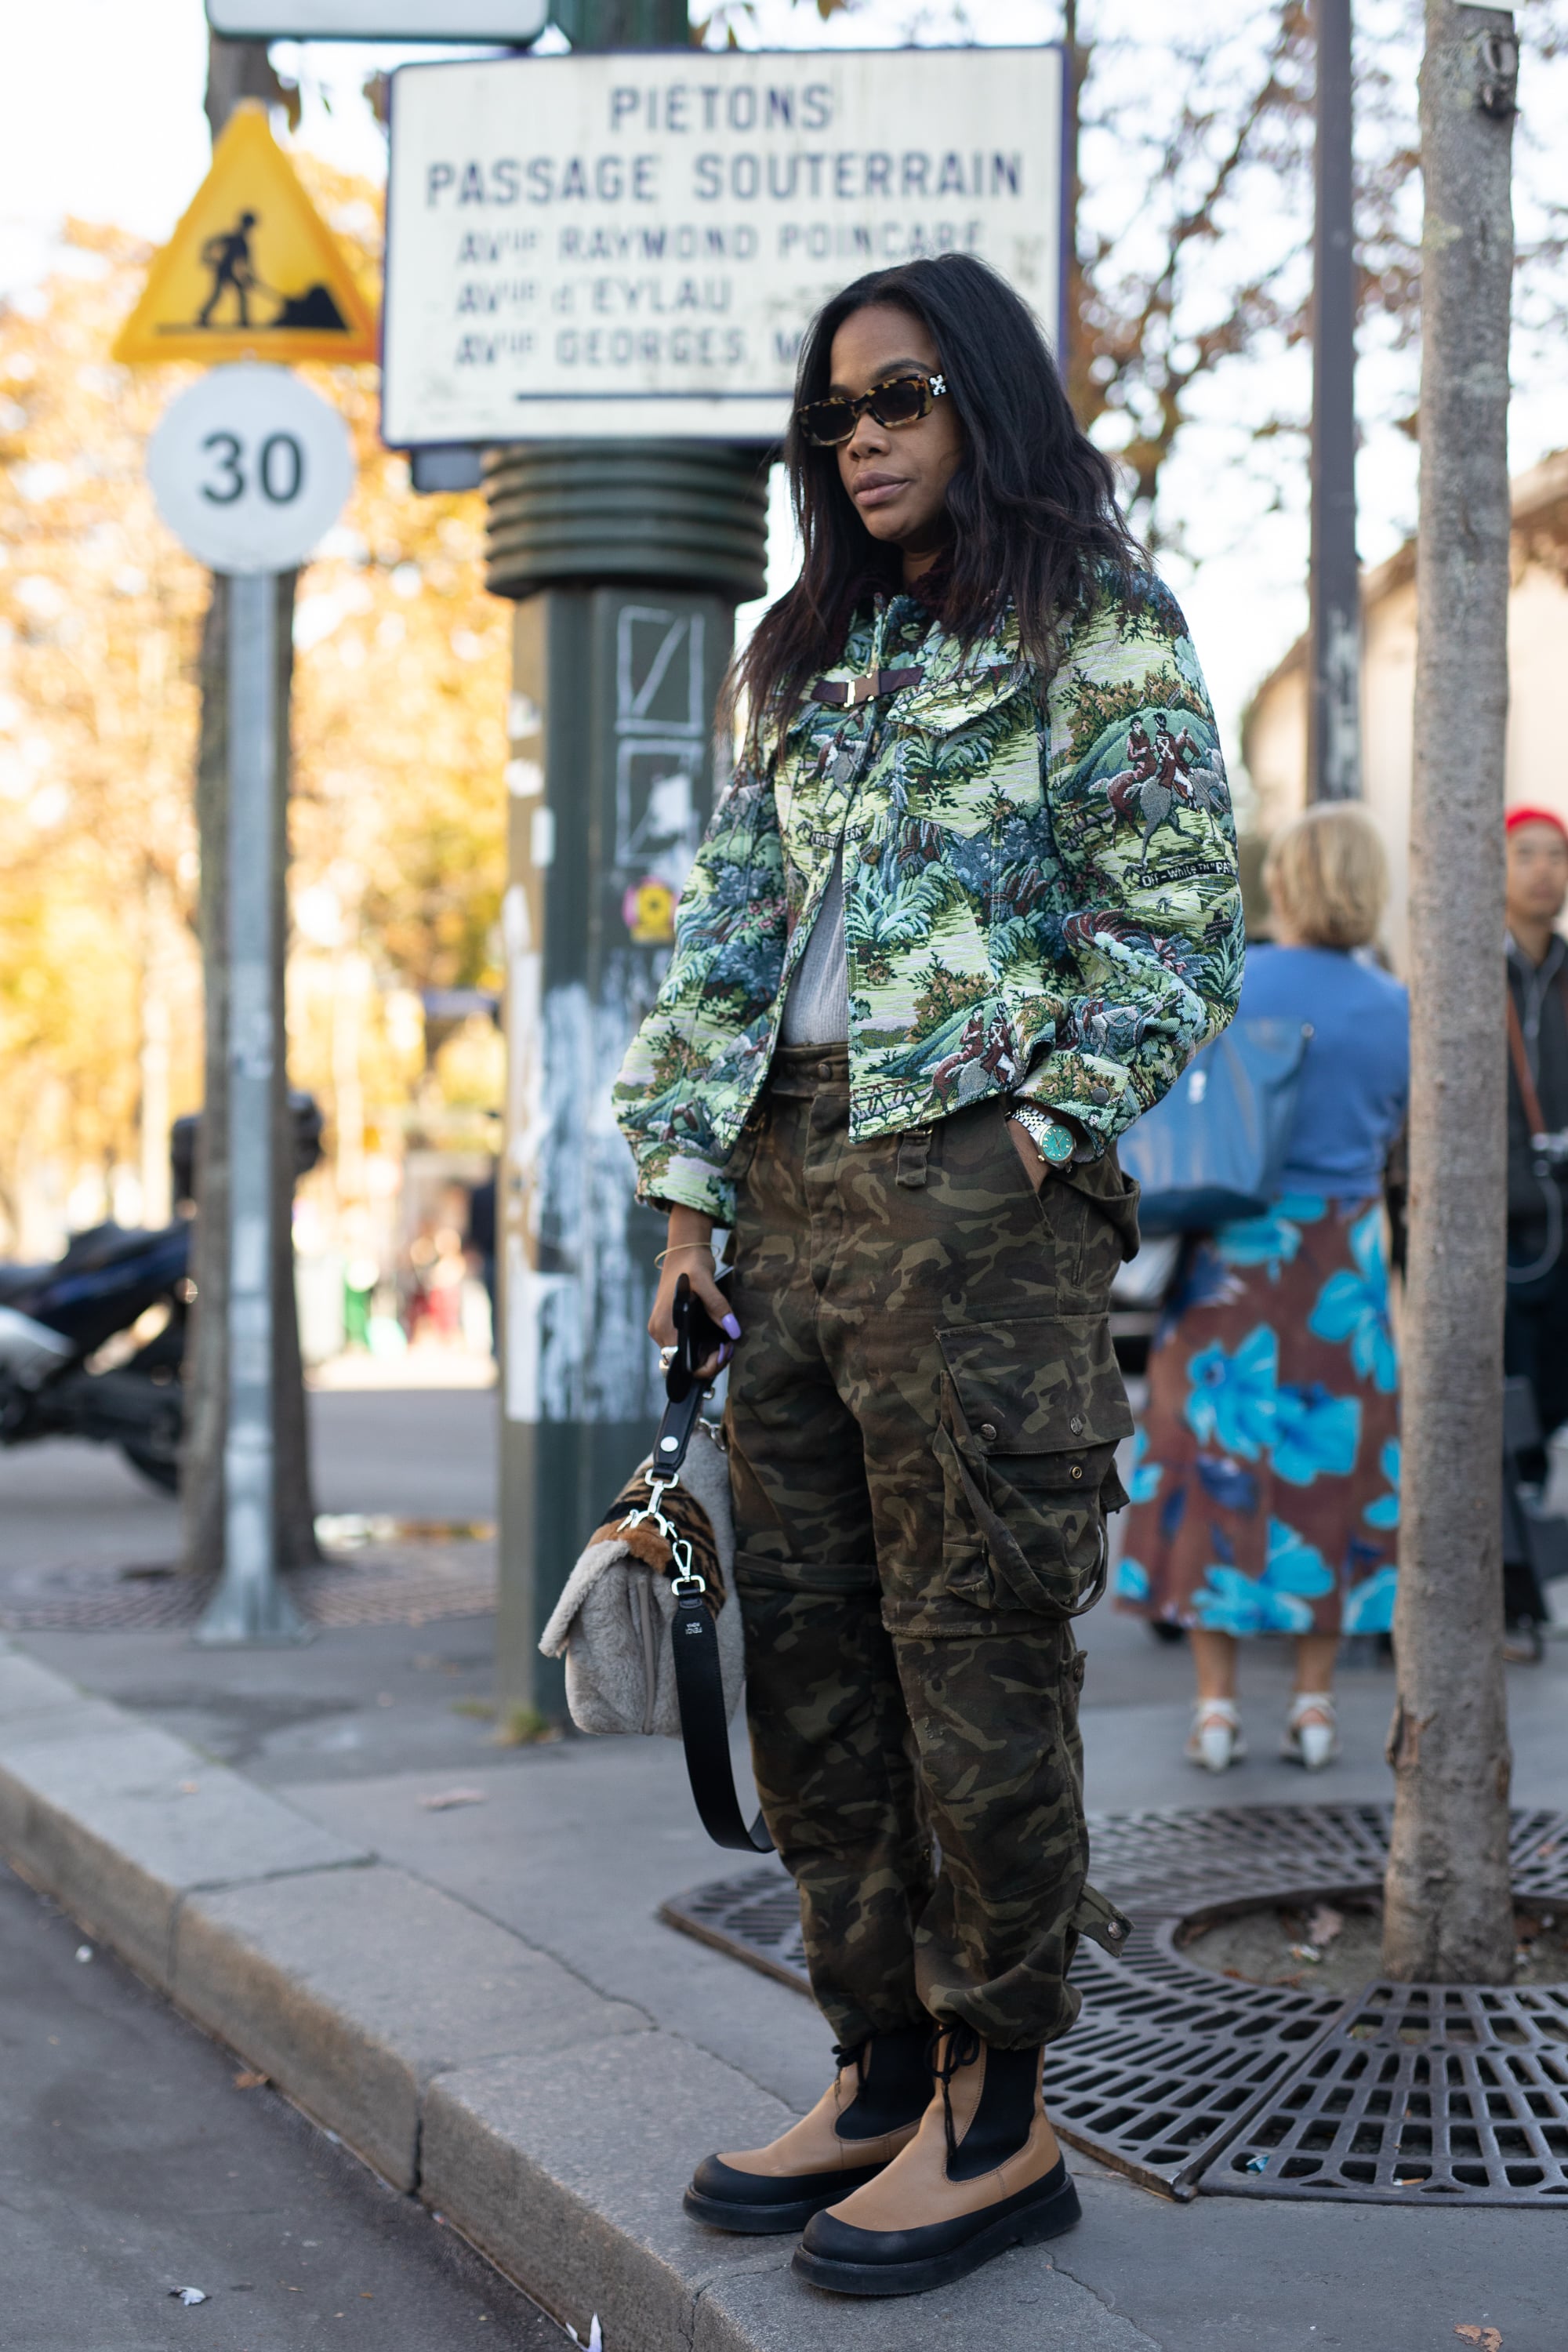 Winter Outfit Idea: A Camo Jacket and Cargo Pants | 100+ Street Style Shots  to Inspire Your Winter Look (Because You Deserve Better Than a Sweater and  Jeans) | POPSUGAR Fashion Photo 68